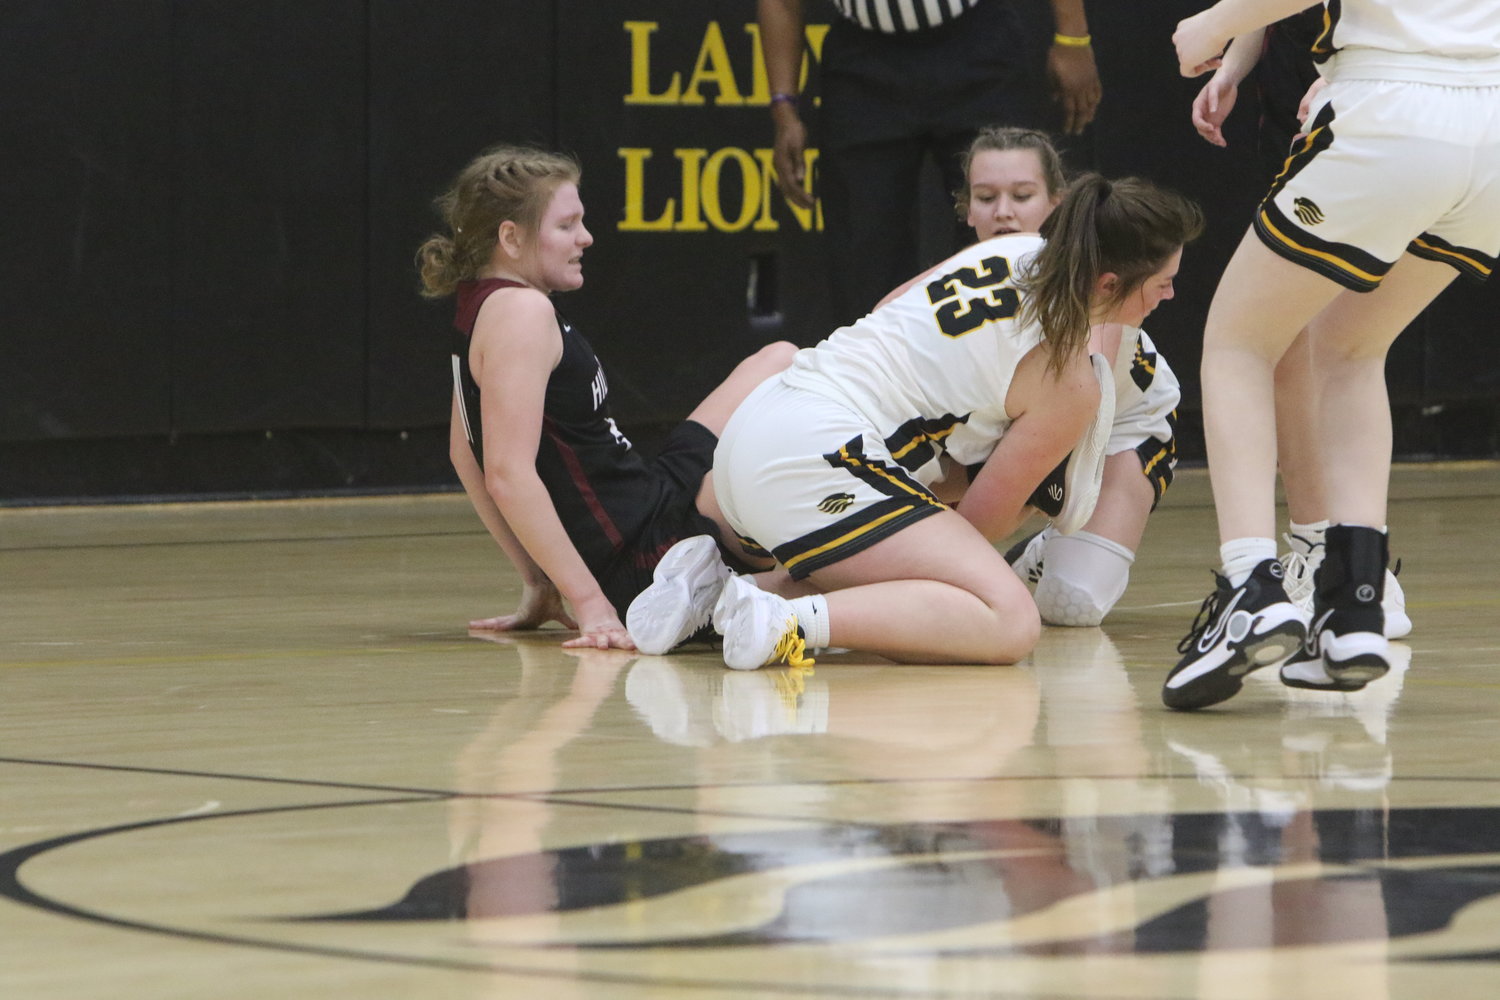 Madelyn McCullough of Lone Tree wins a scramble for the ball.